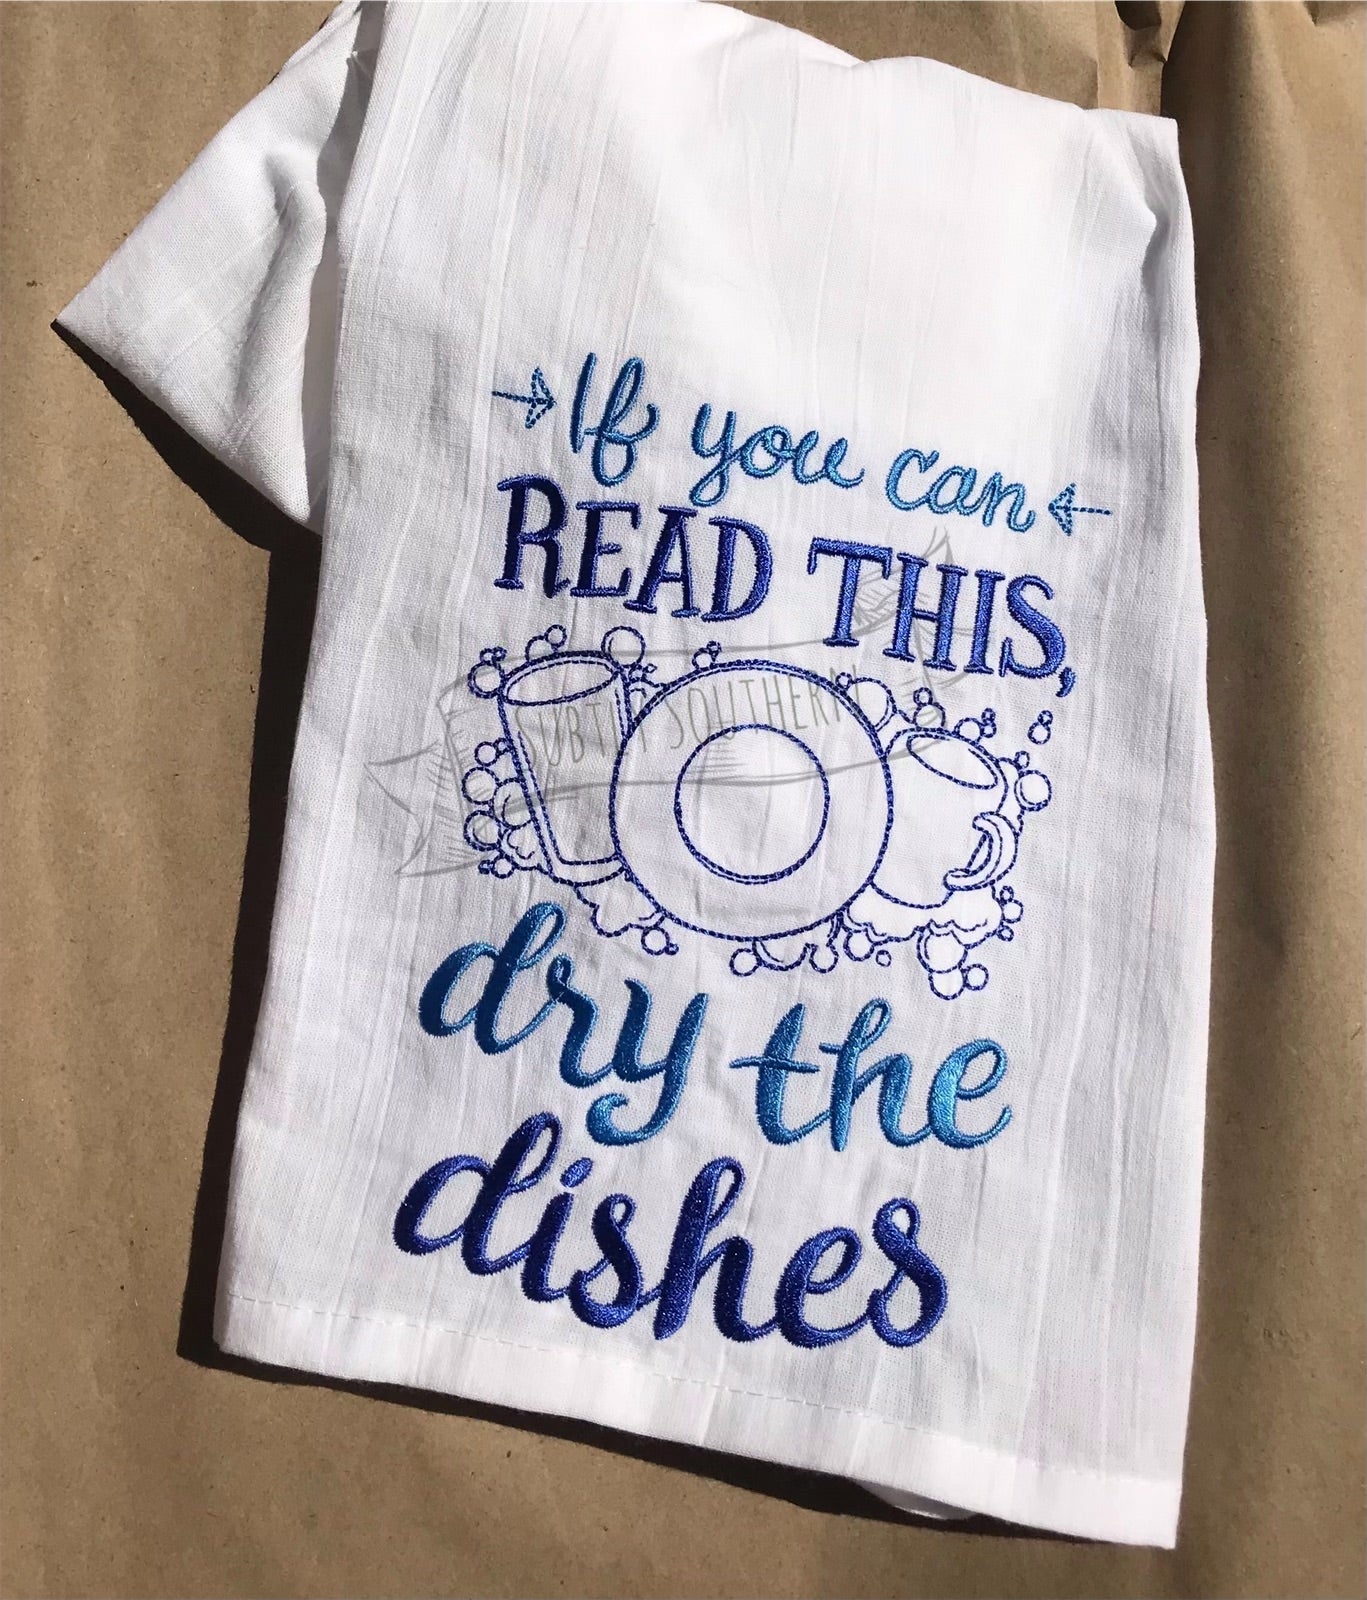 Dry the Dishes Kitchen Towel